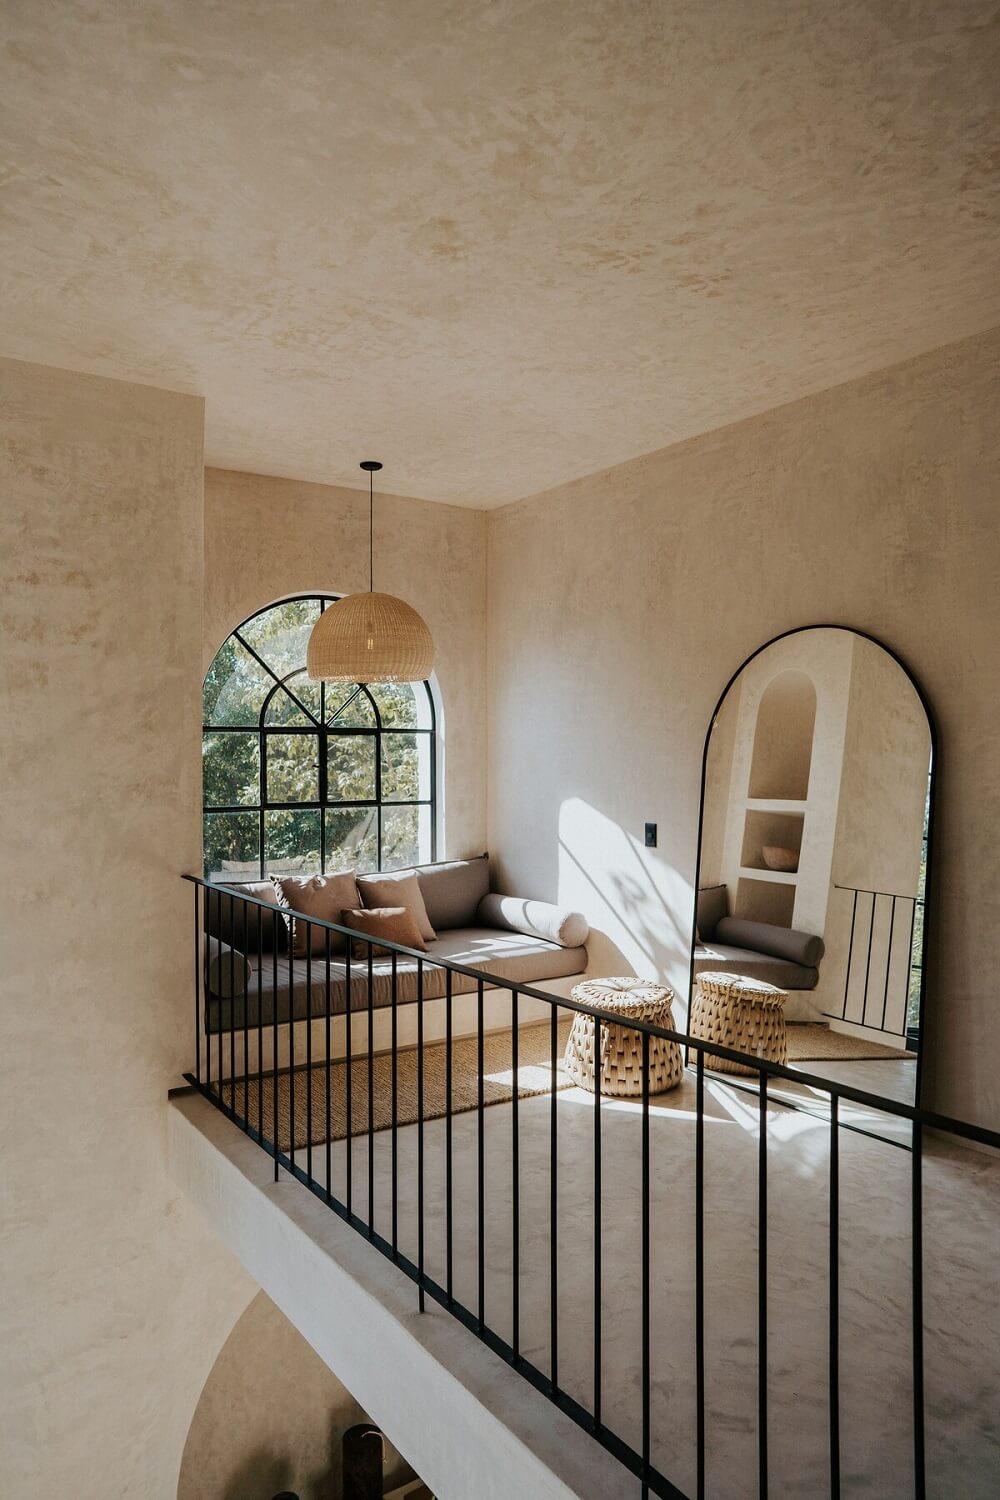 loft-space-window-seat-arched-mirror-nordroom